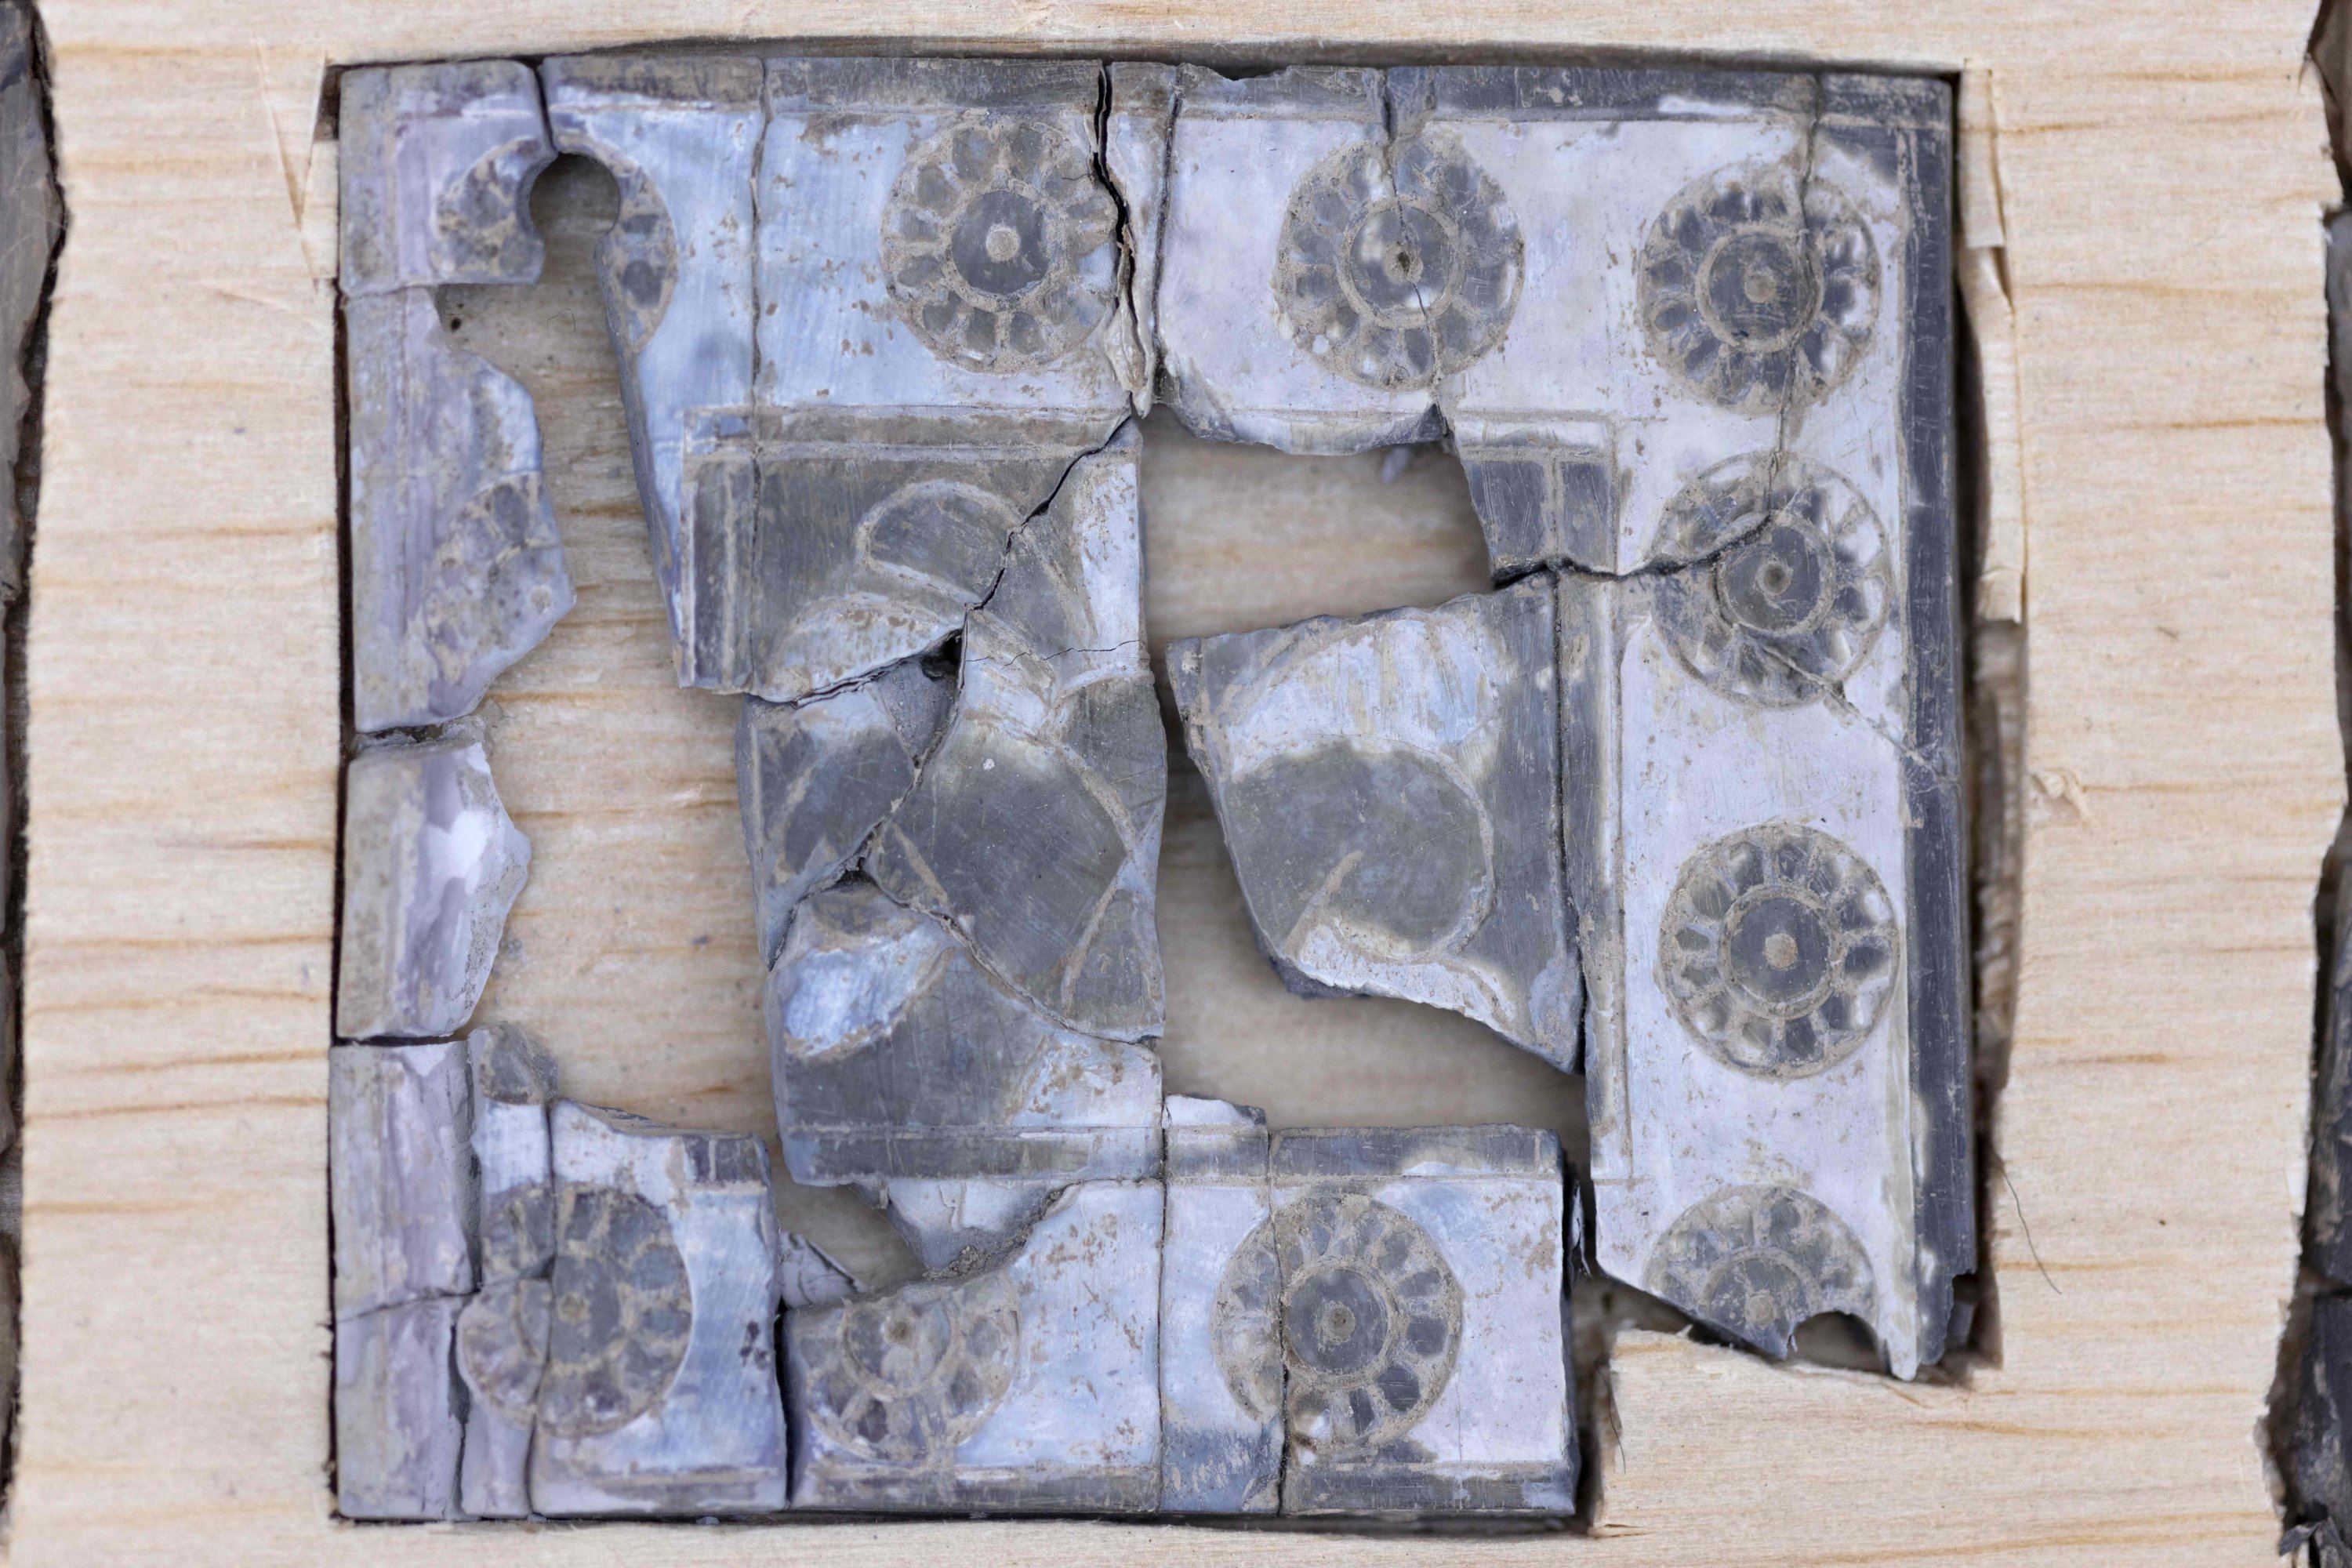 A picture shows ivory plaques unearthed in excavations in the Givati Parking Lot in the City of David National Park near the walls of the Old City of East Jerusalem, occupied Palestine, Sept. 5, 2022. (AFP Photo)